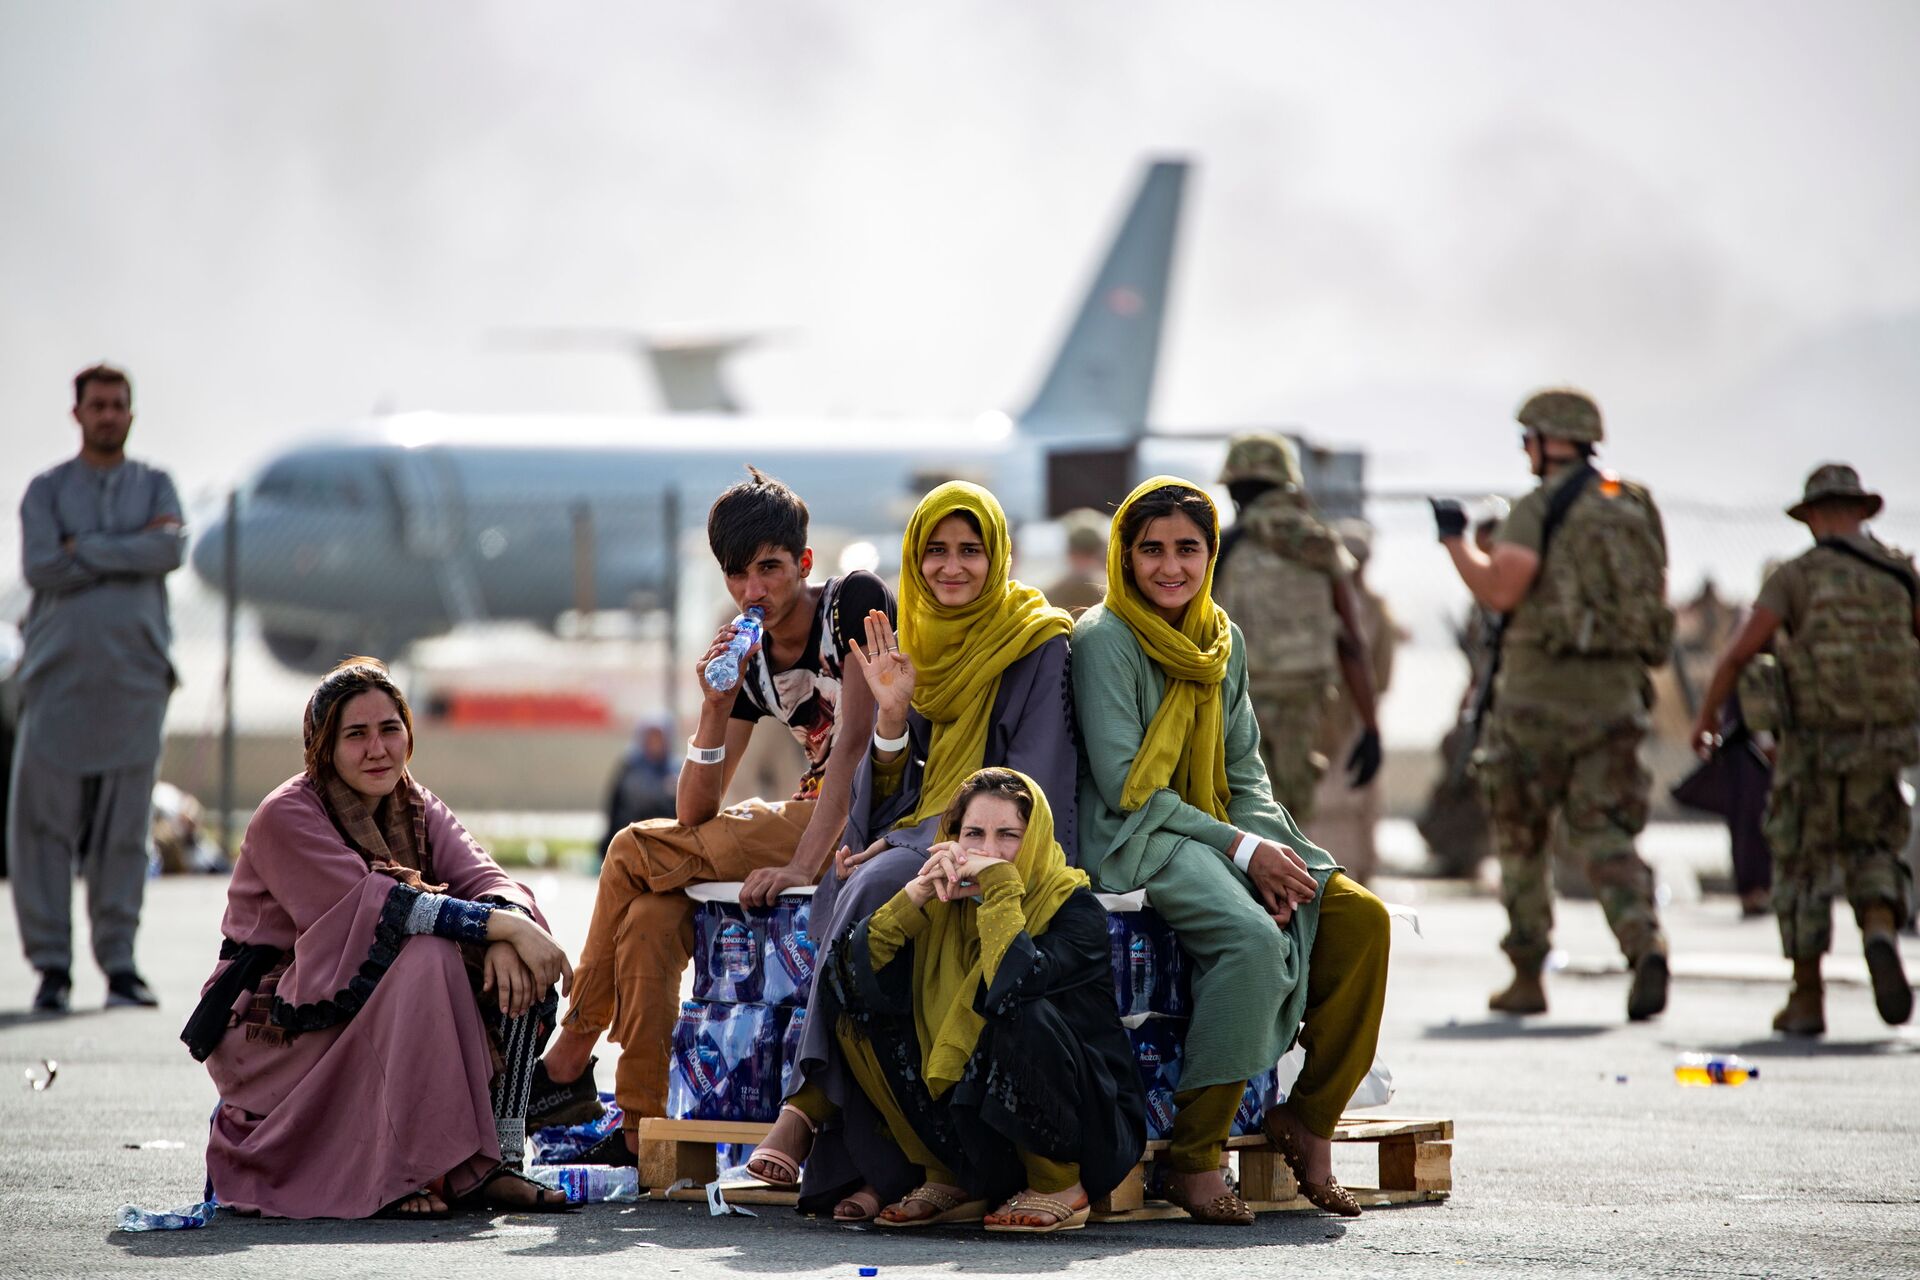 Evacuee children wait for the next flight after being manifested at Hamid Karzai International Airport, in Kabul, Afghanistan, August 19, 2021 - Sputnik International, 1920, 07.09.2021